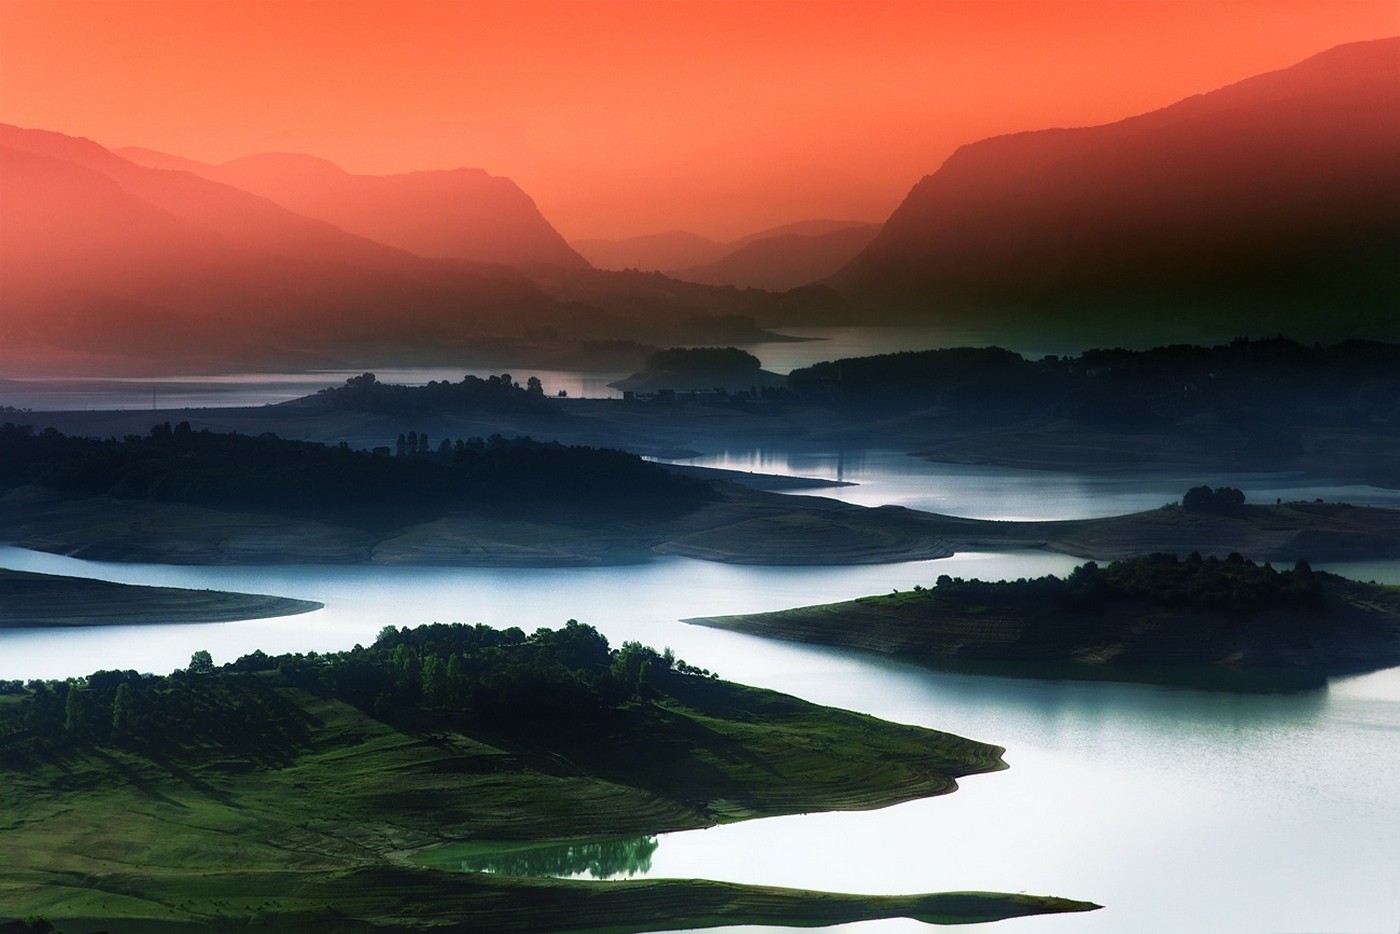 General 1400x934 nature landscape lake mountains mist red sky blue water green field trees Bosnia and Herzegovina